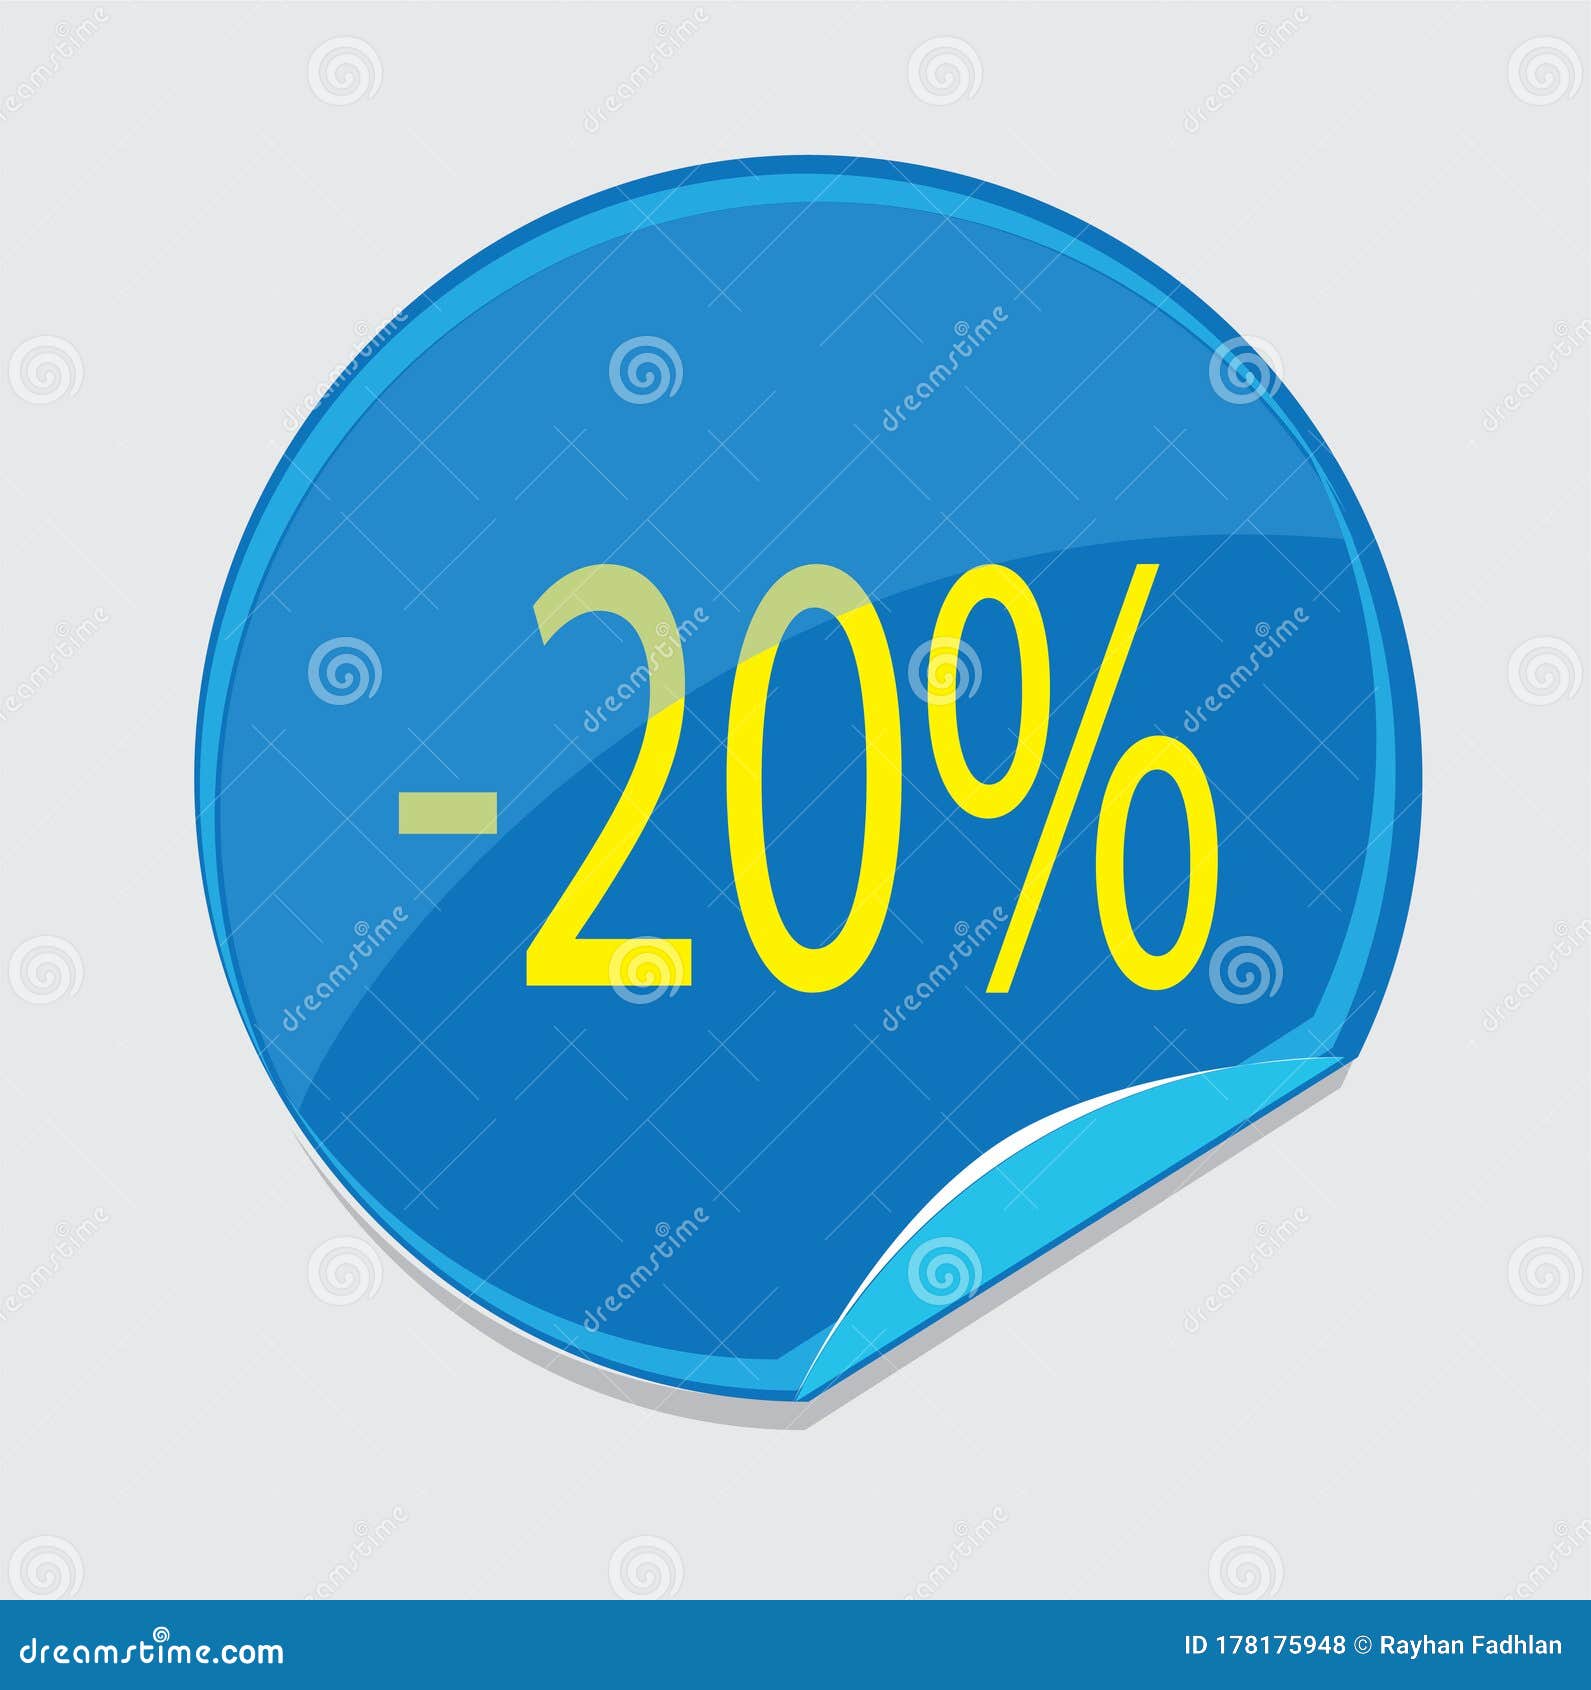 Sticker Icon Up To 20 Discount Stock Vector - Illustration of marketing ...